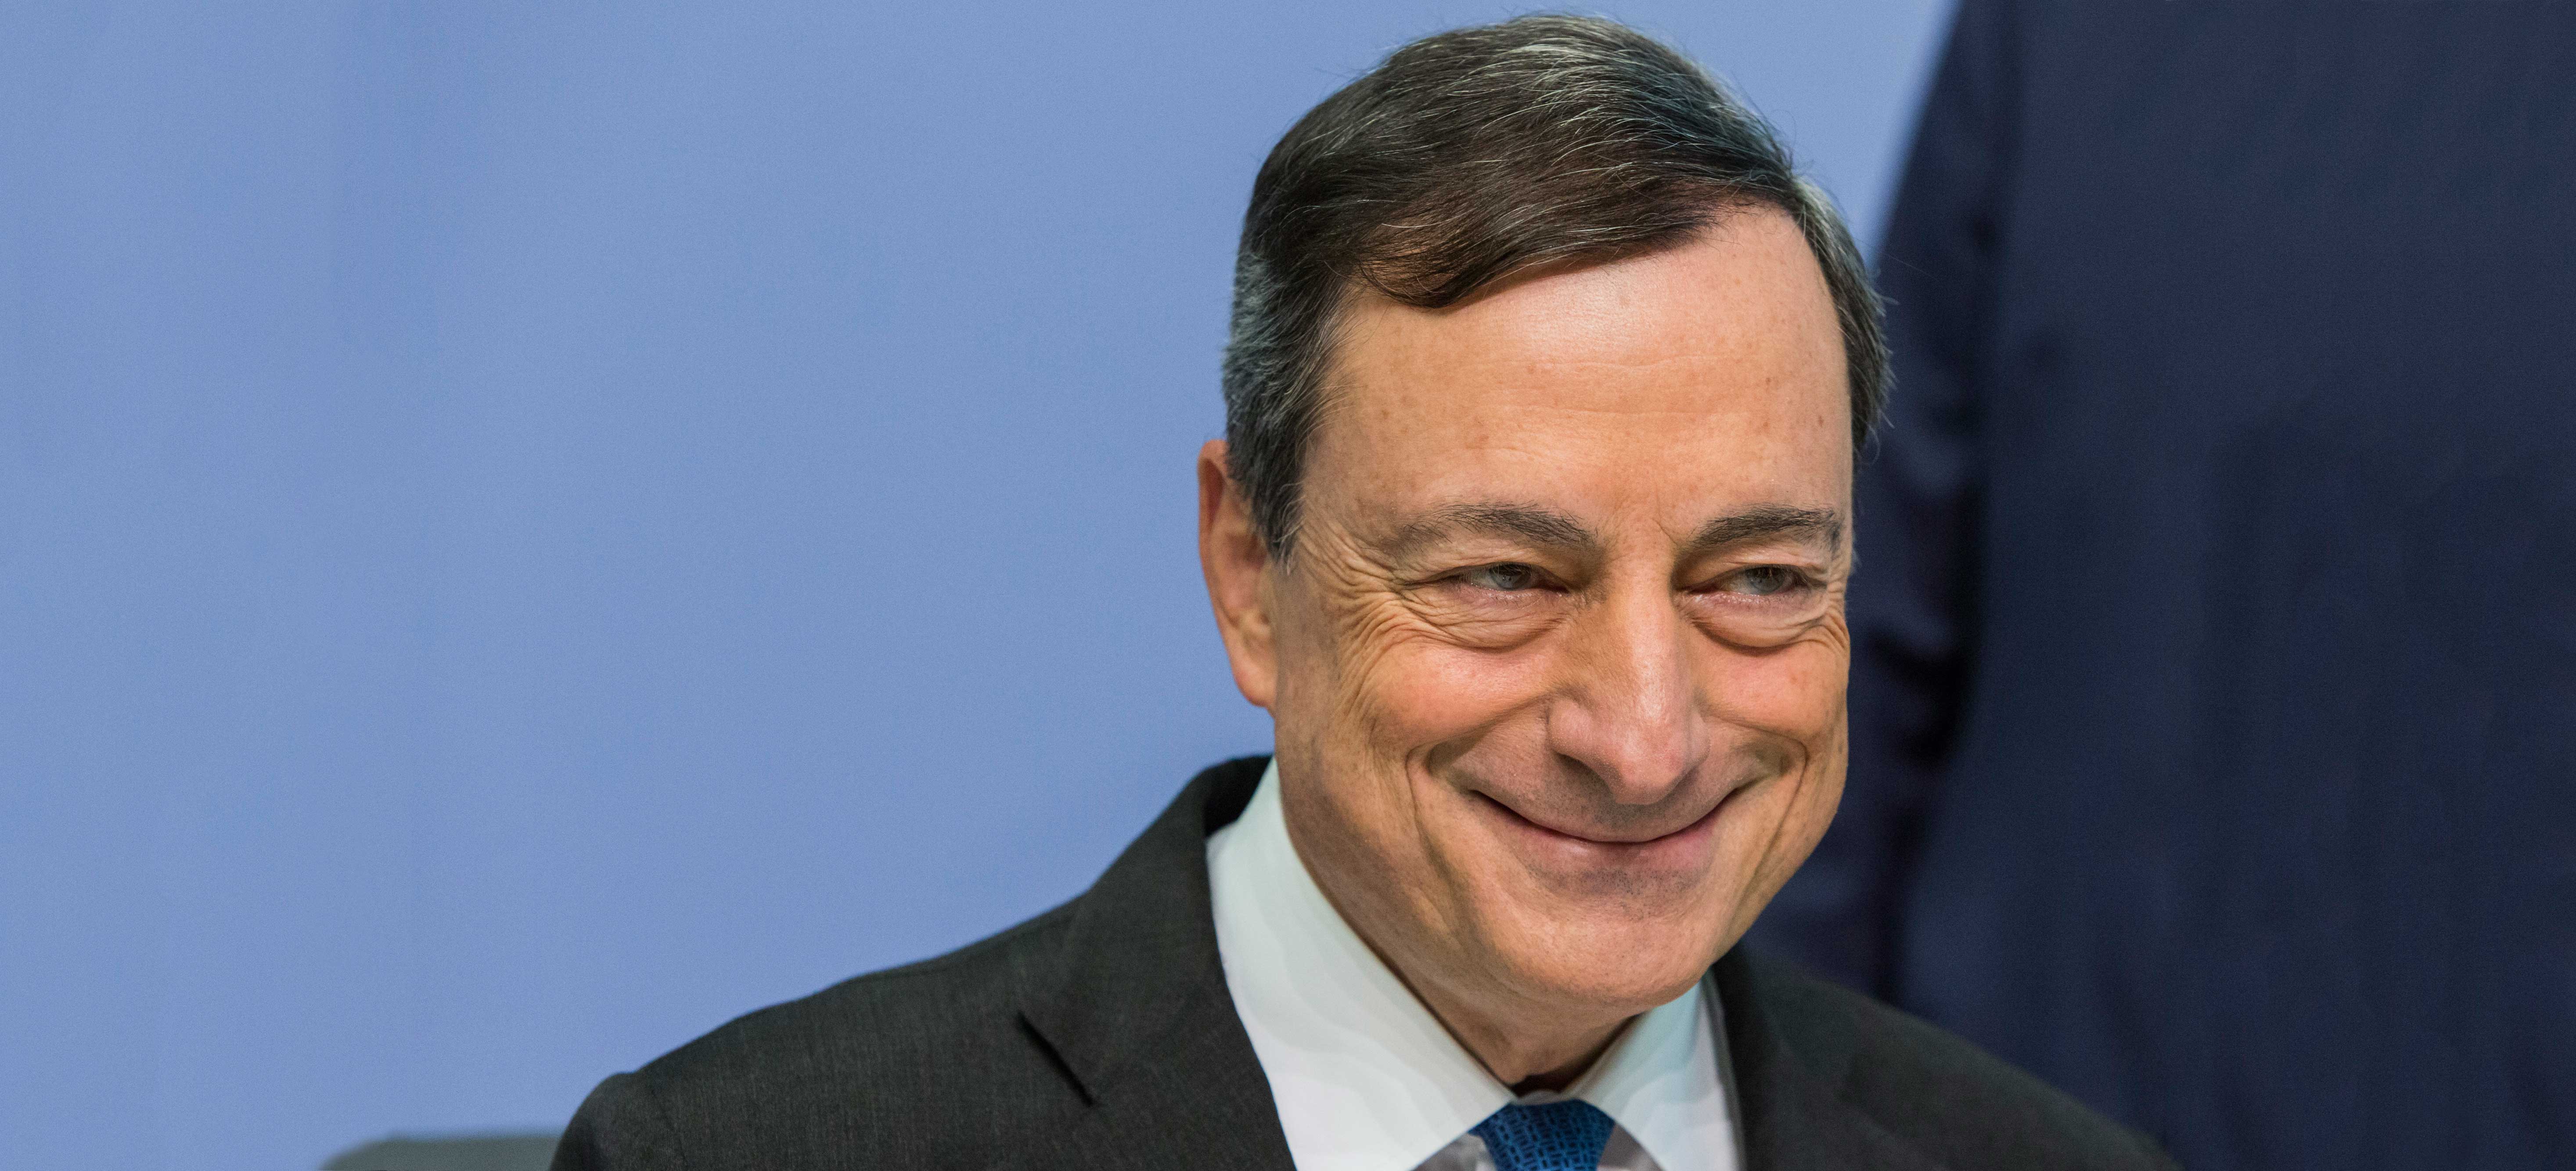 Draghi Ready to Act on Inflation Concerns